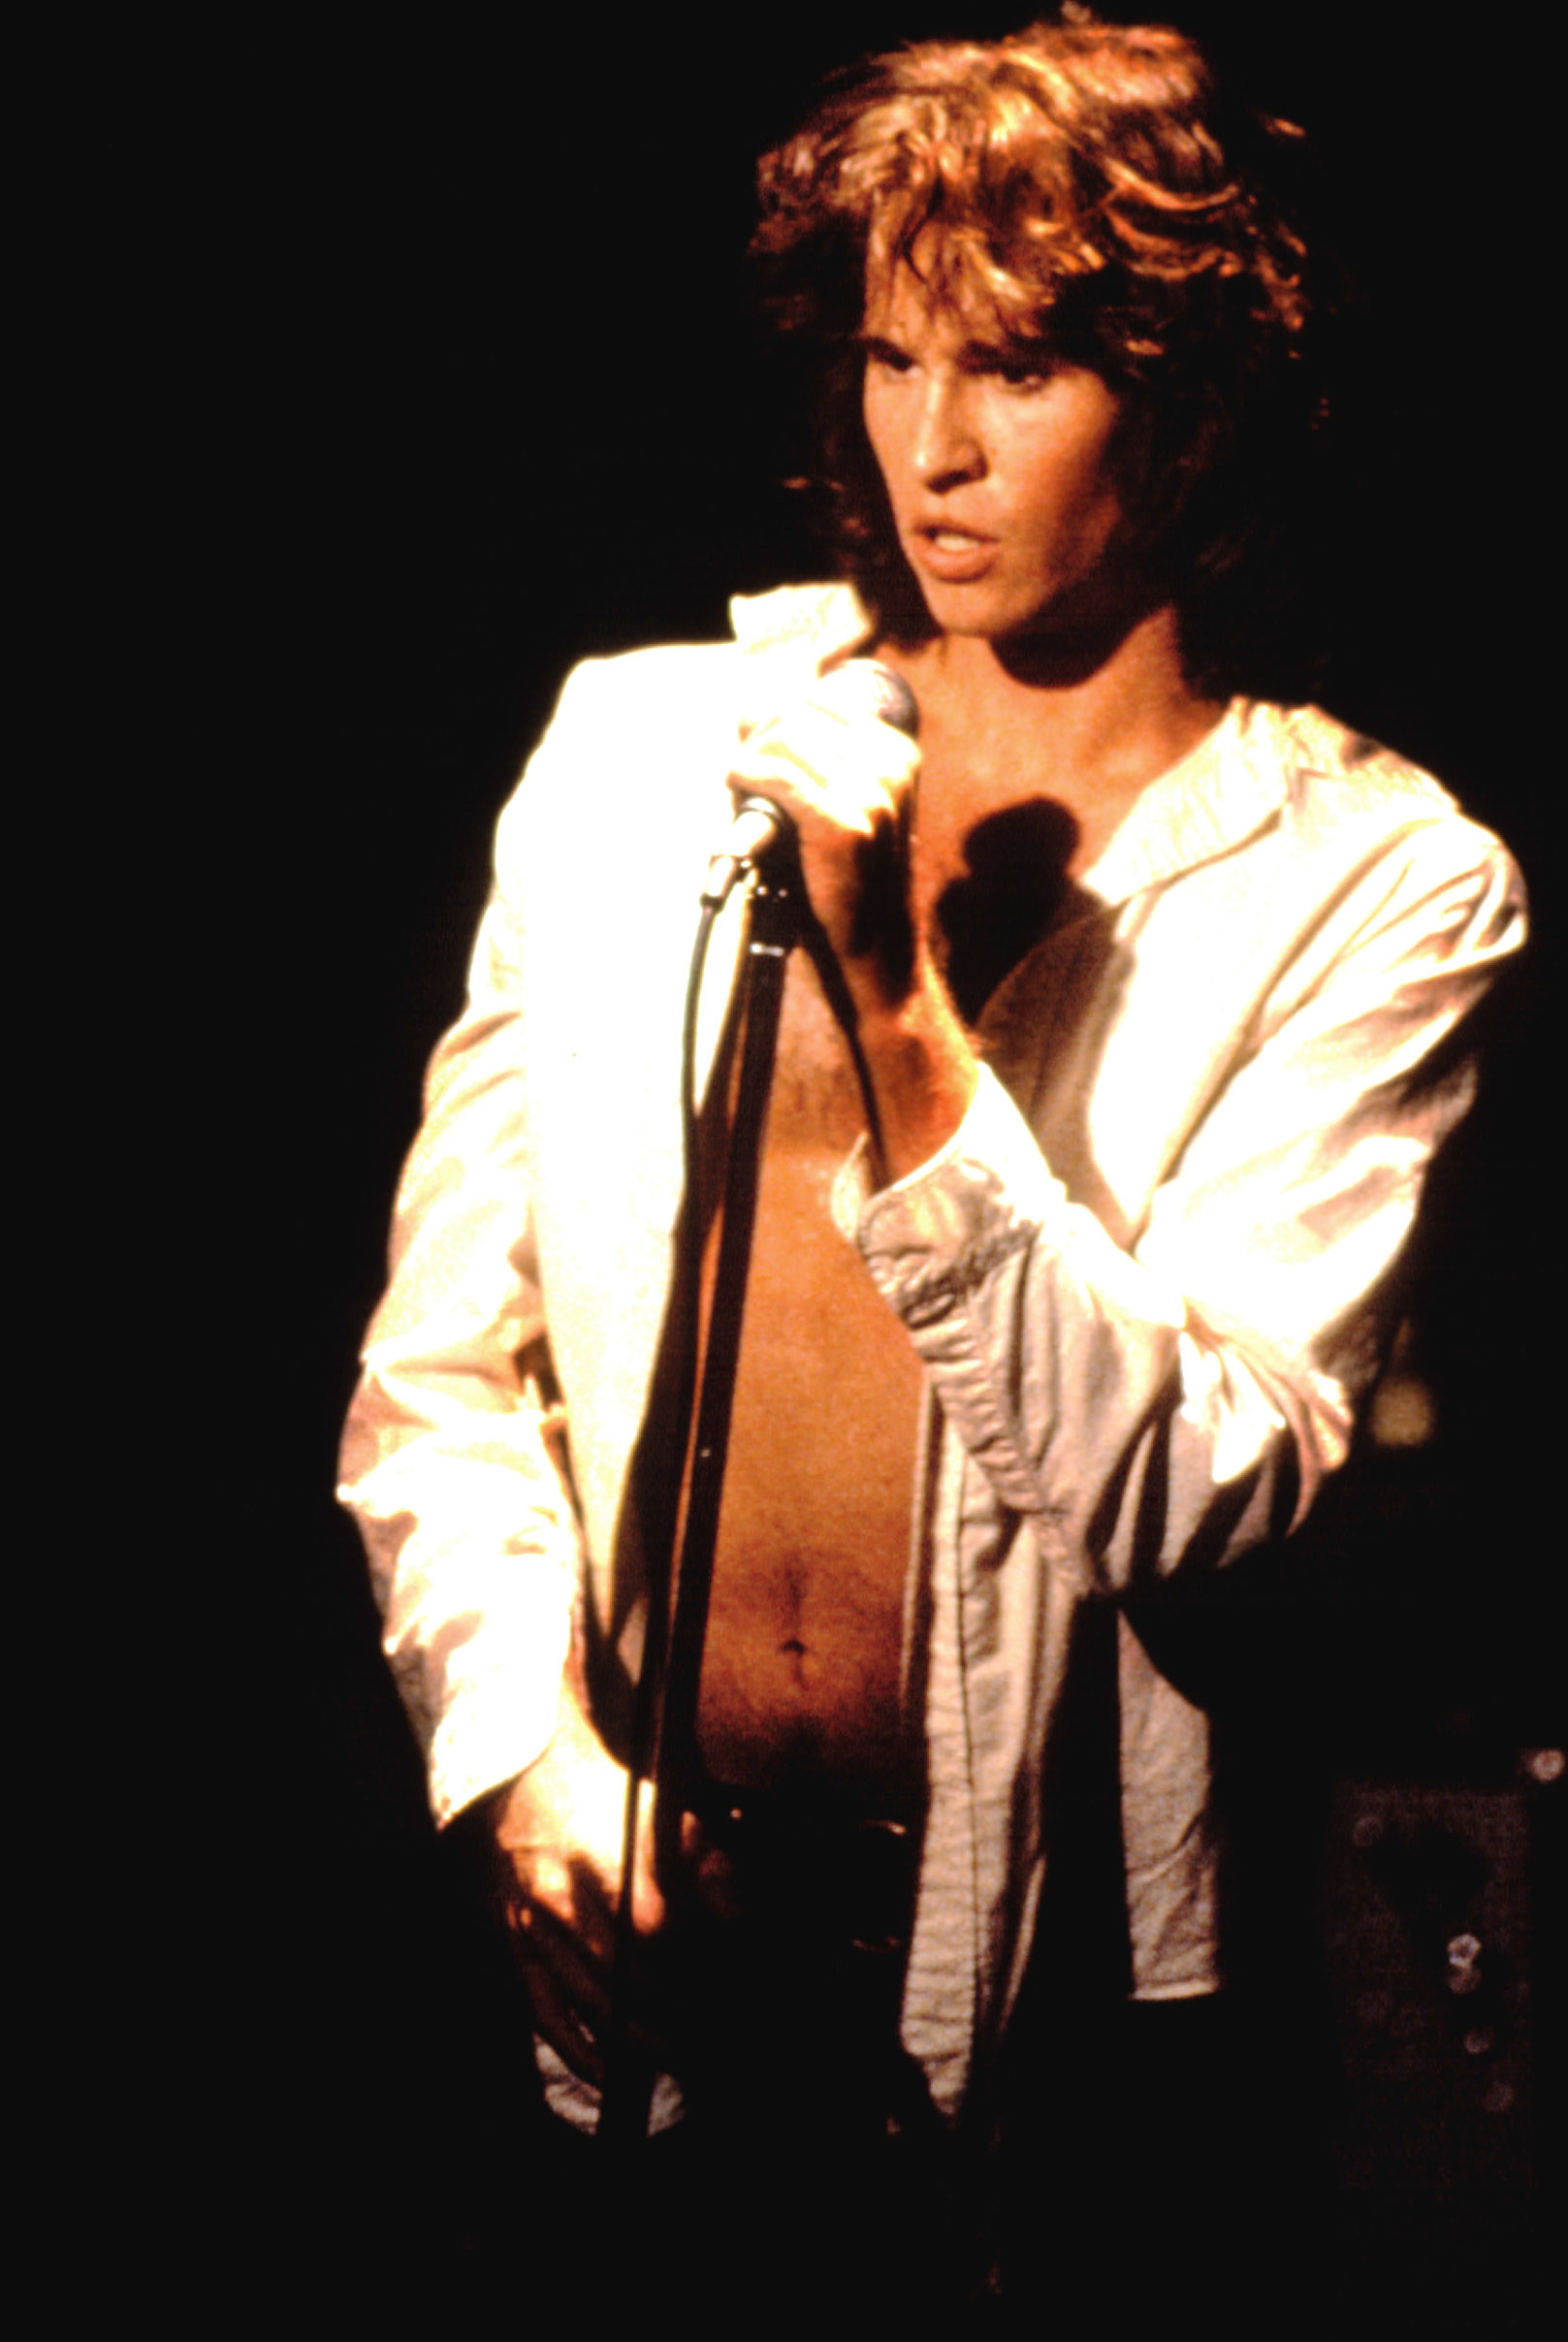 val singing on stage with his shirt open